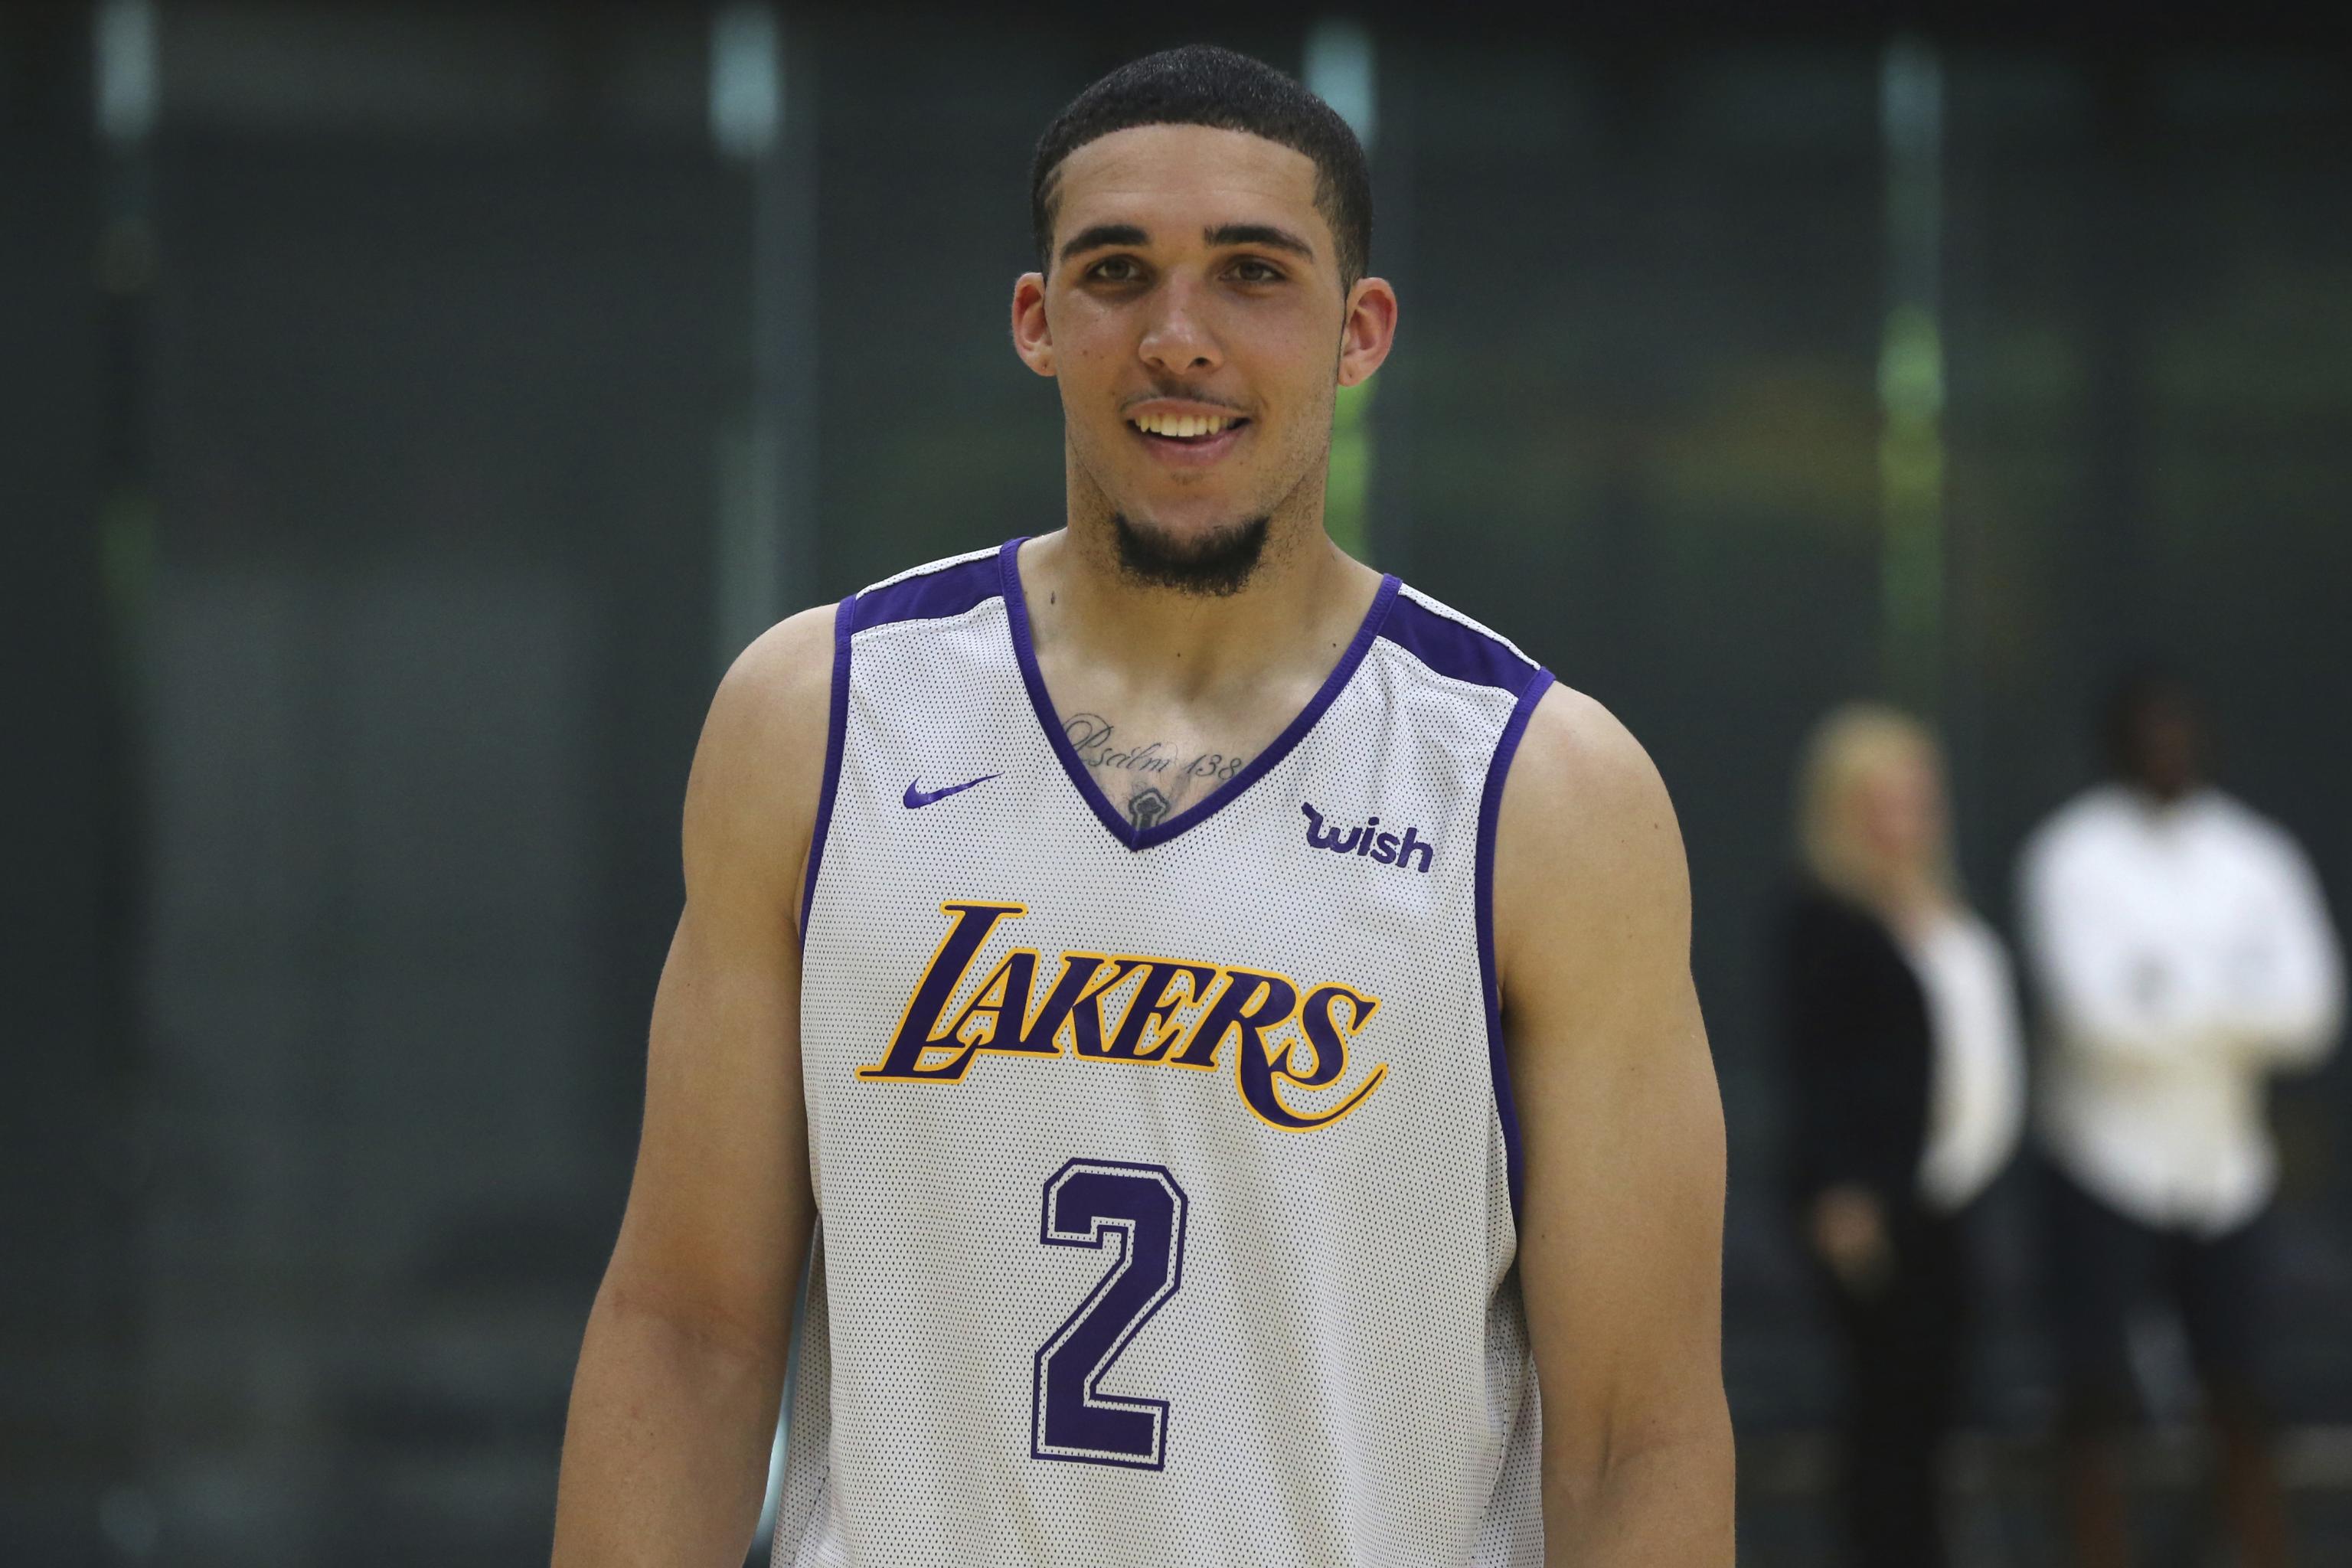 LIANGELO BALL (ON THE ROAD TO THE NBA) SELECTED 14TH IN THE NBA G